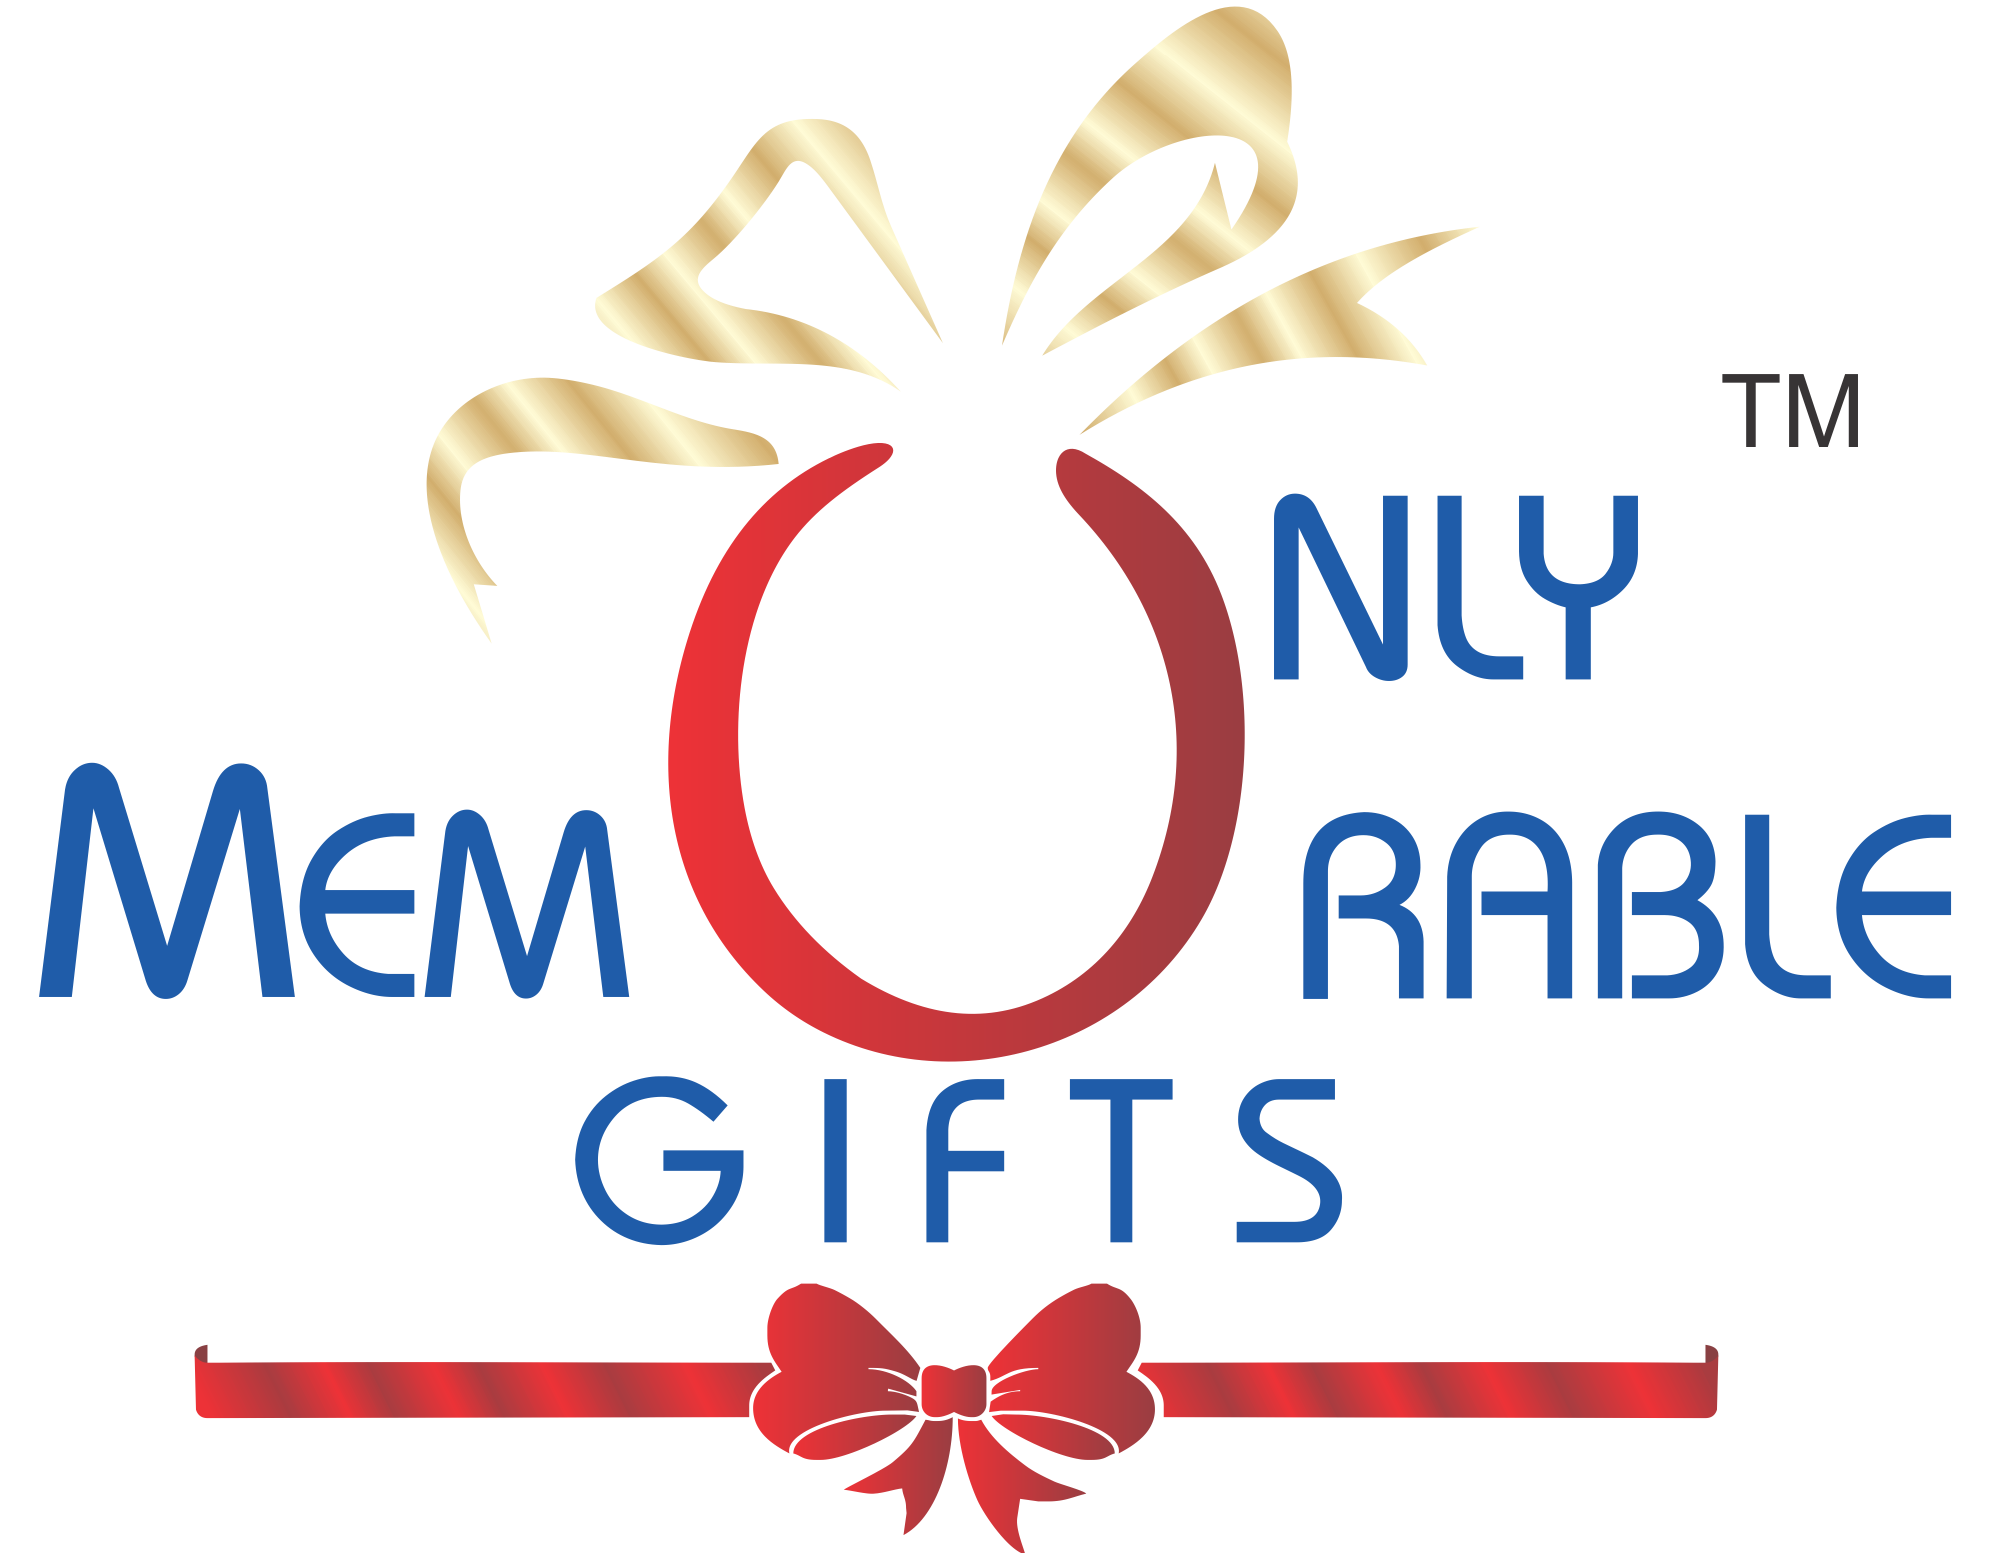 Only Memorable Gifts